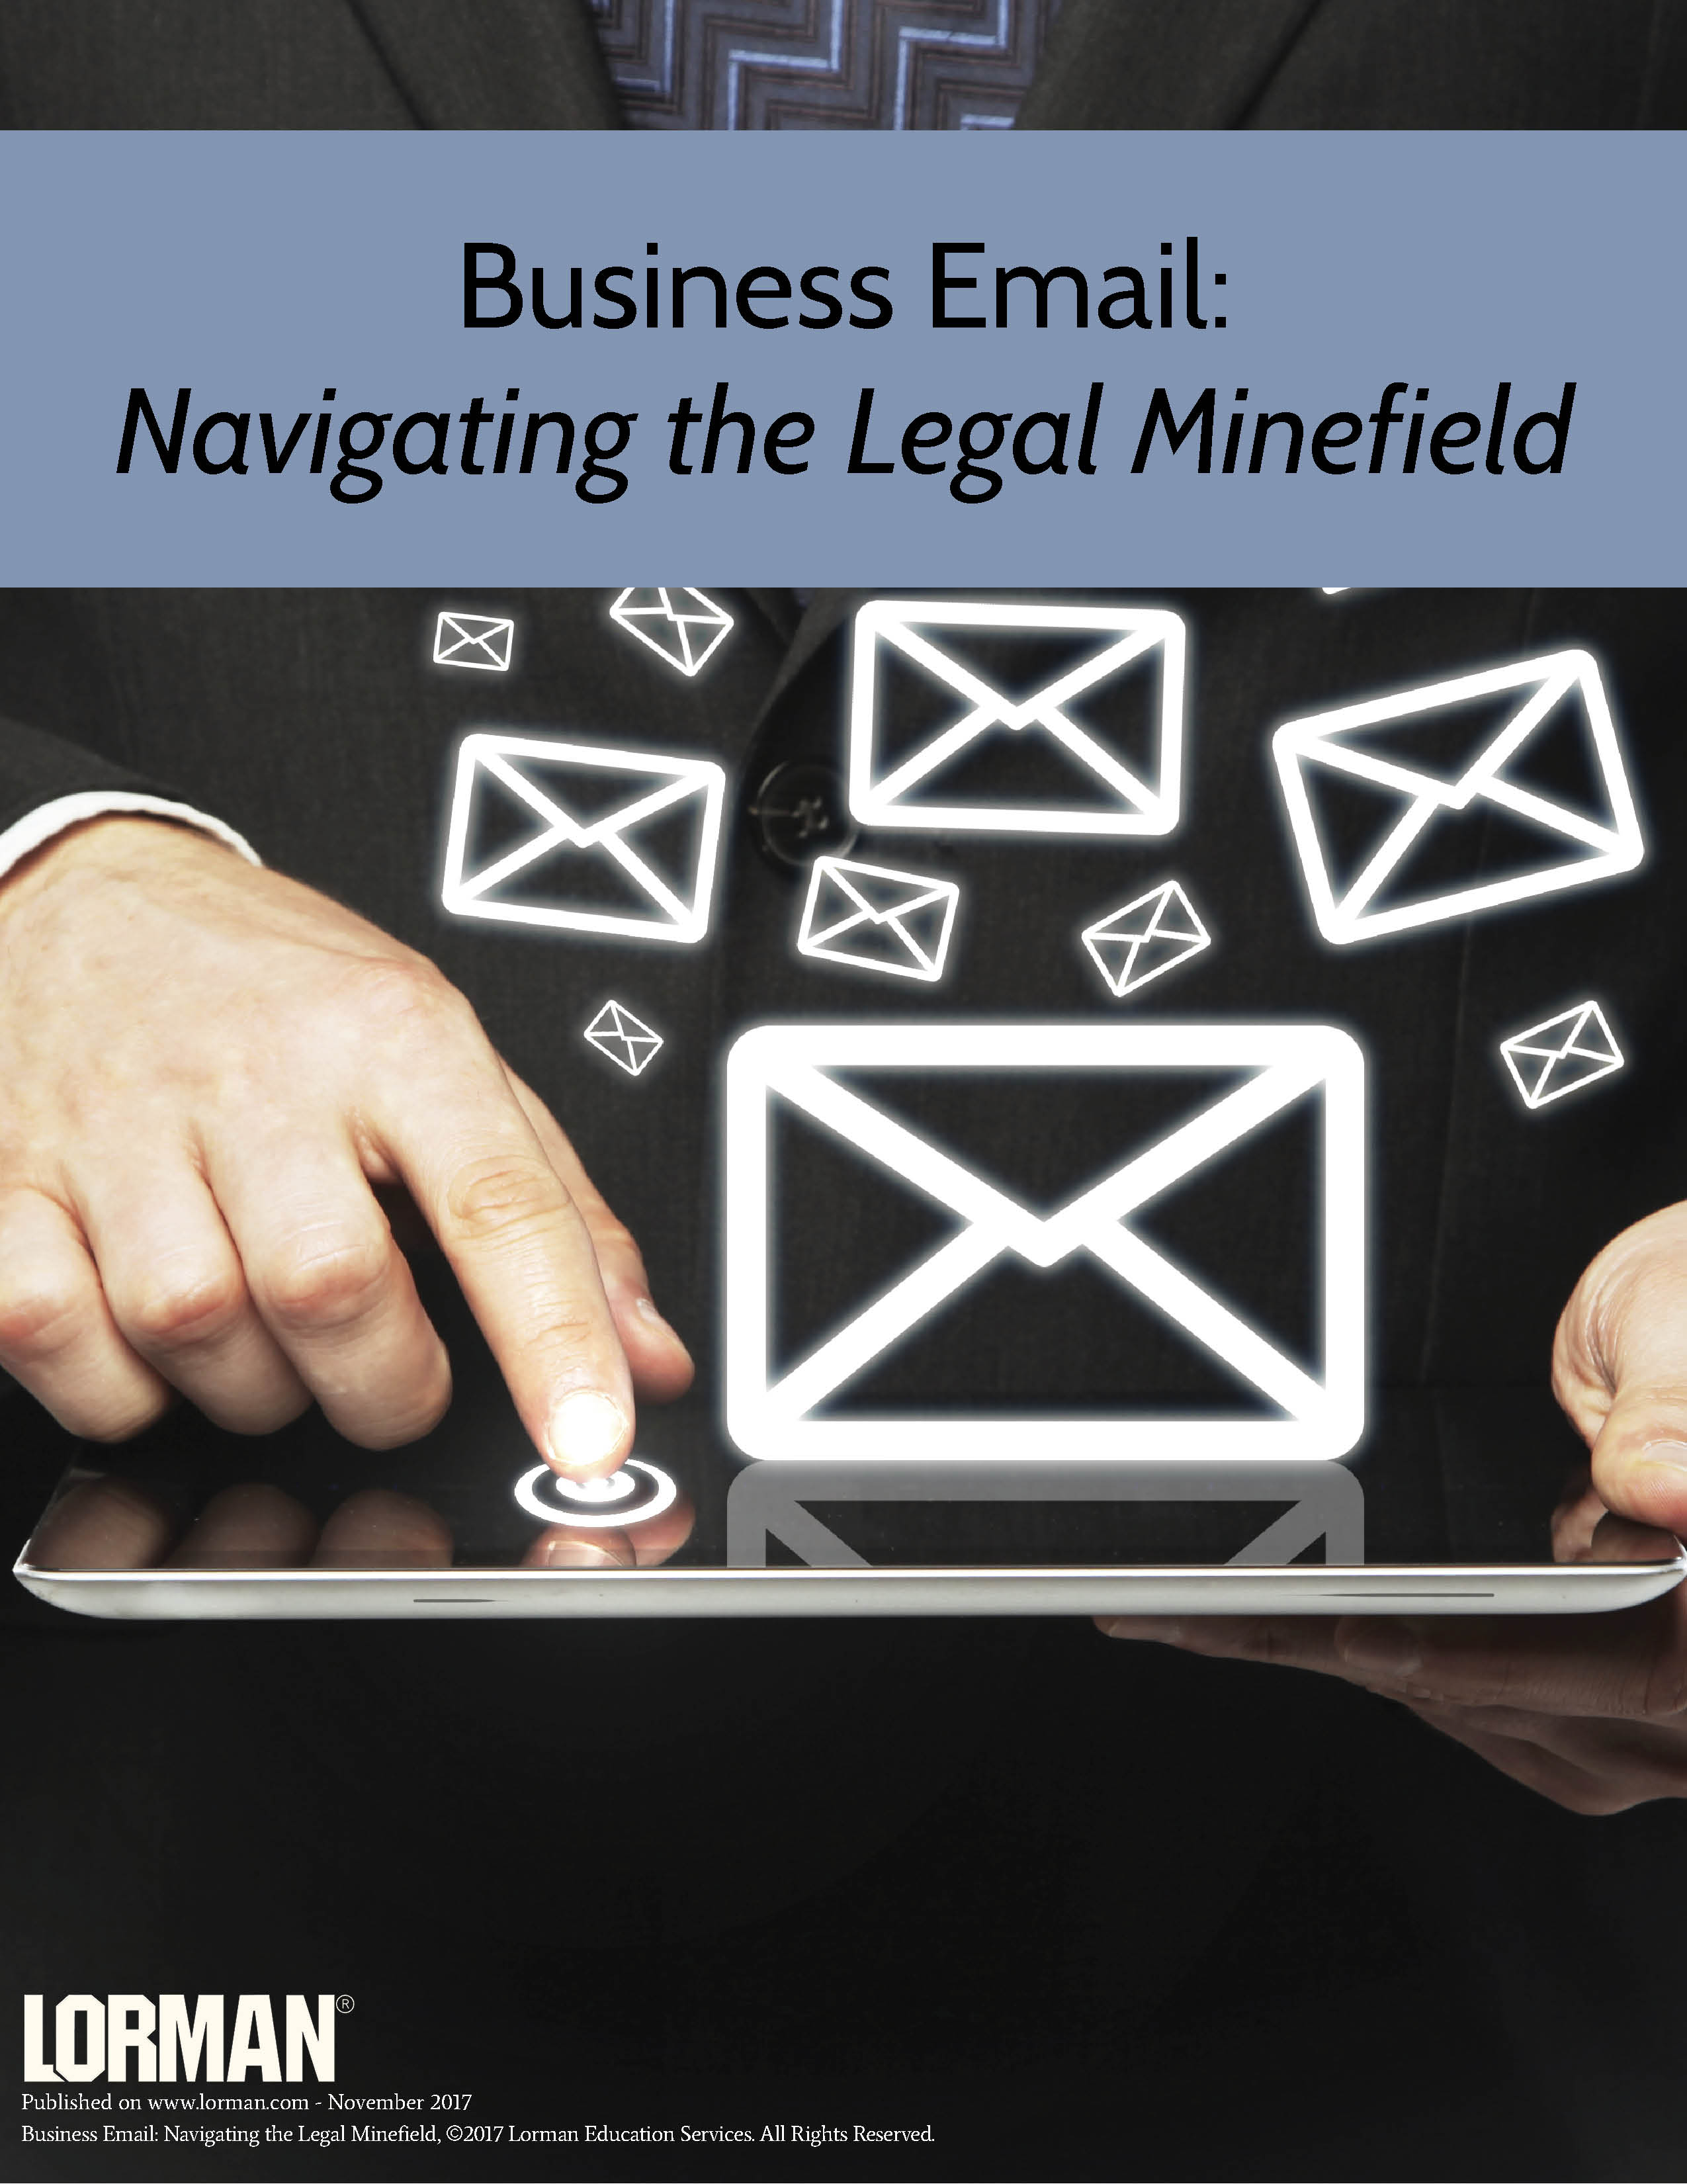 Business Email: Navigating the Legal Minefield